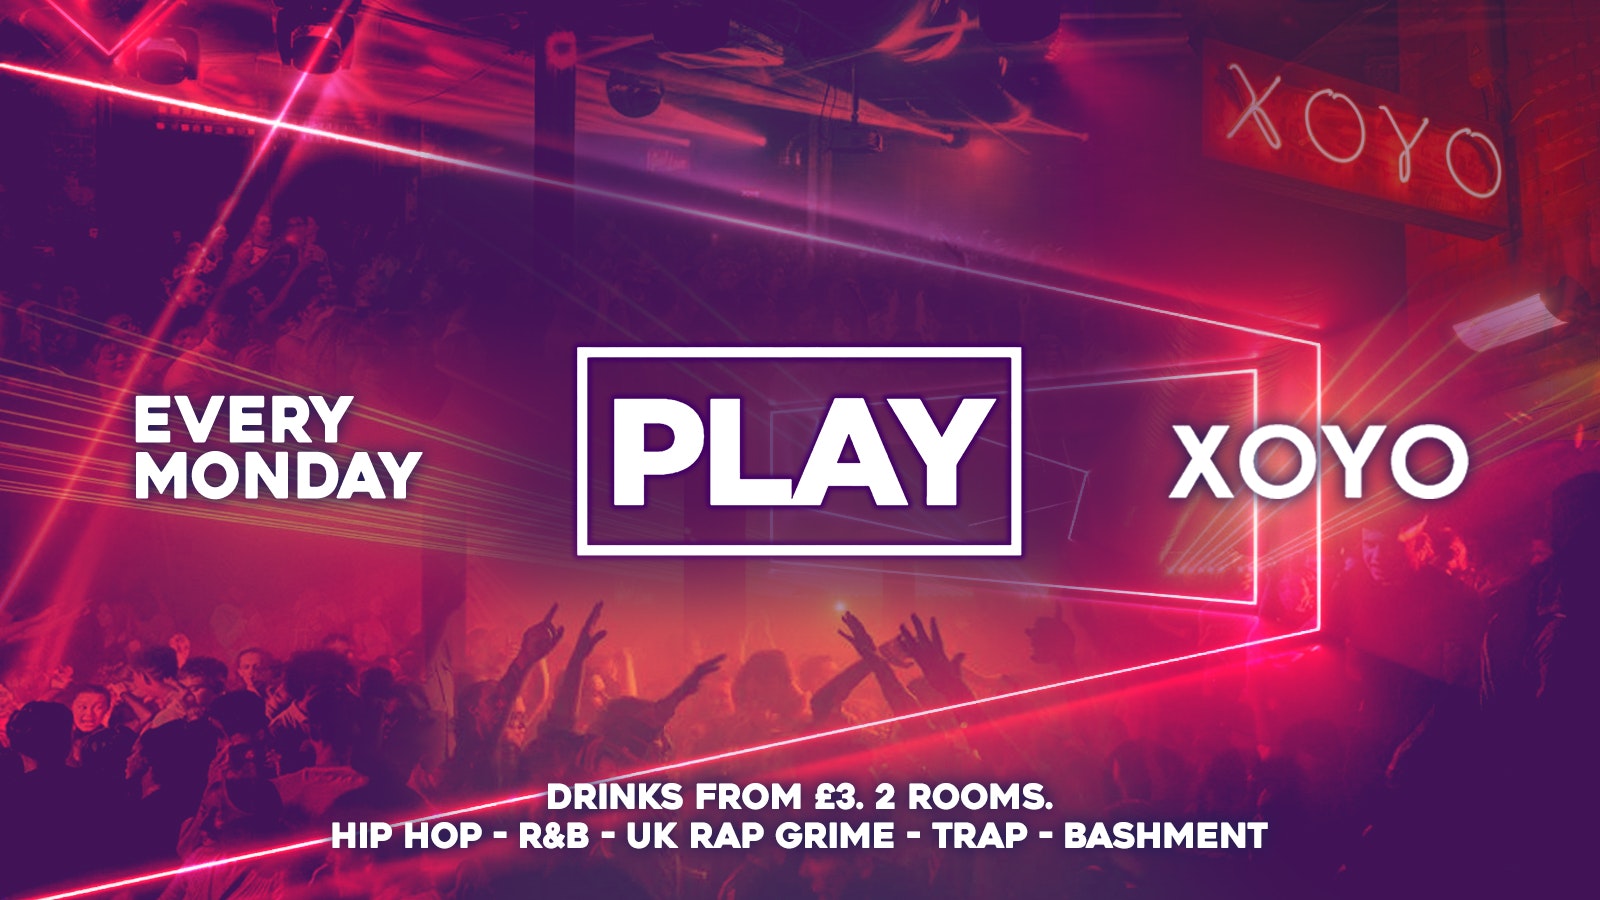 Play @ XOYO – The Biggest Weekly Monday Student Night in London! – 11th July 2022 🔥